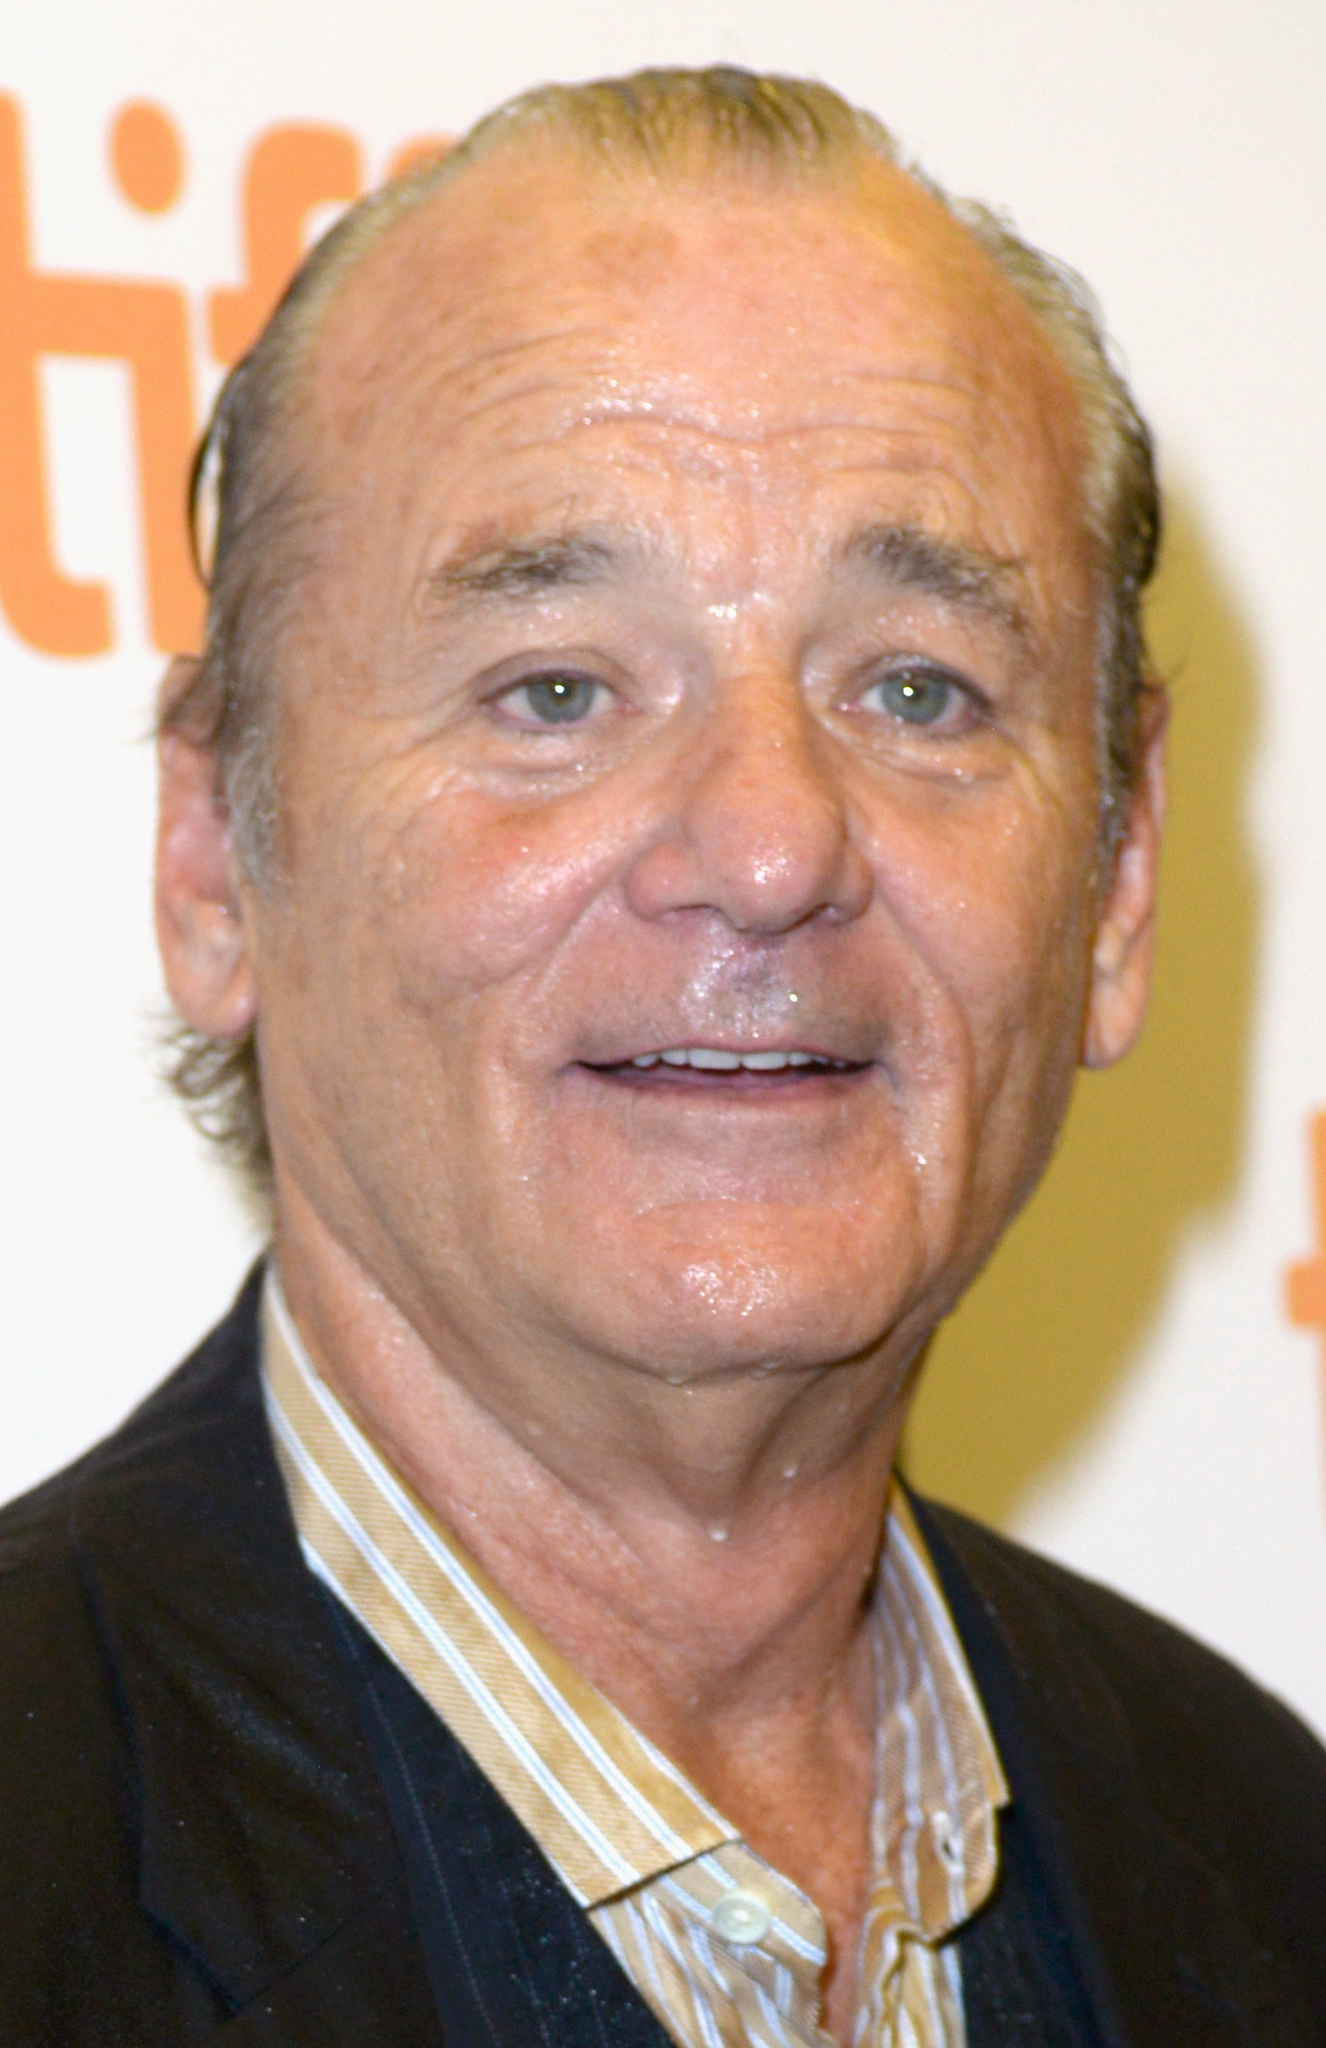 Bill Murray at event of St. Vincent (2014)